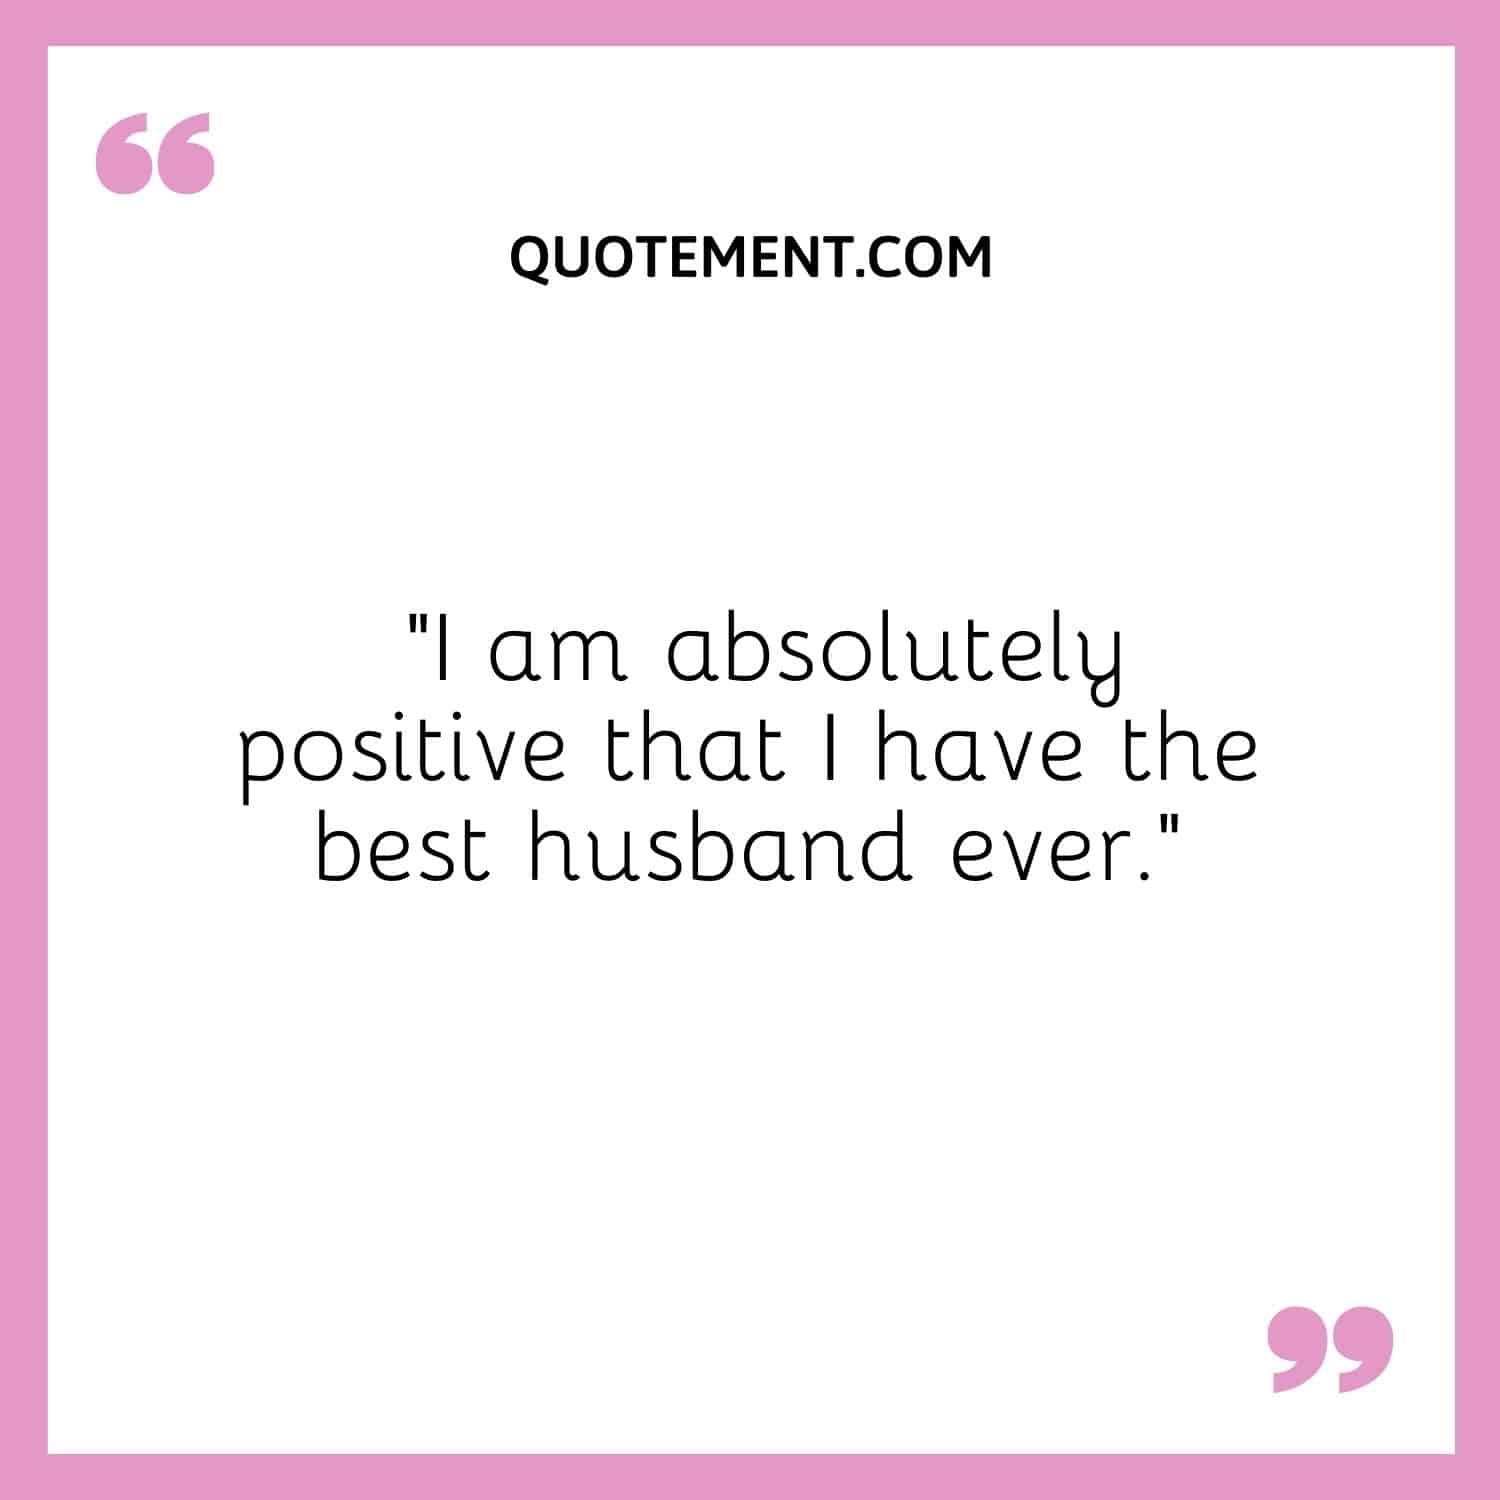 “I am absolutely positive that I have the best husband ever.”